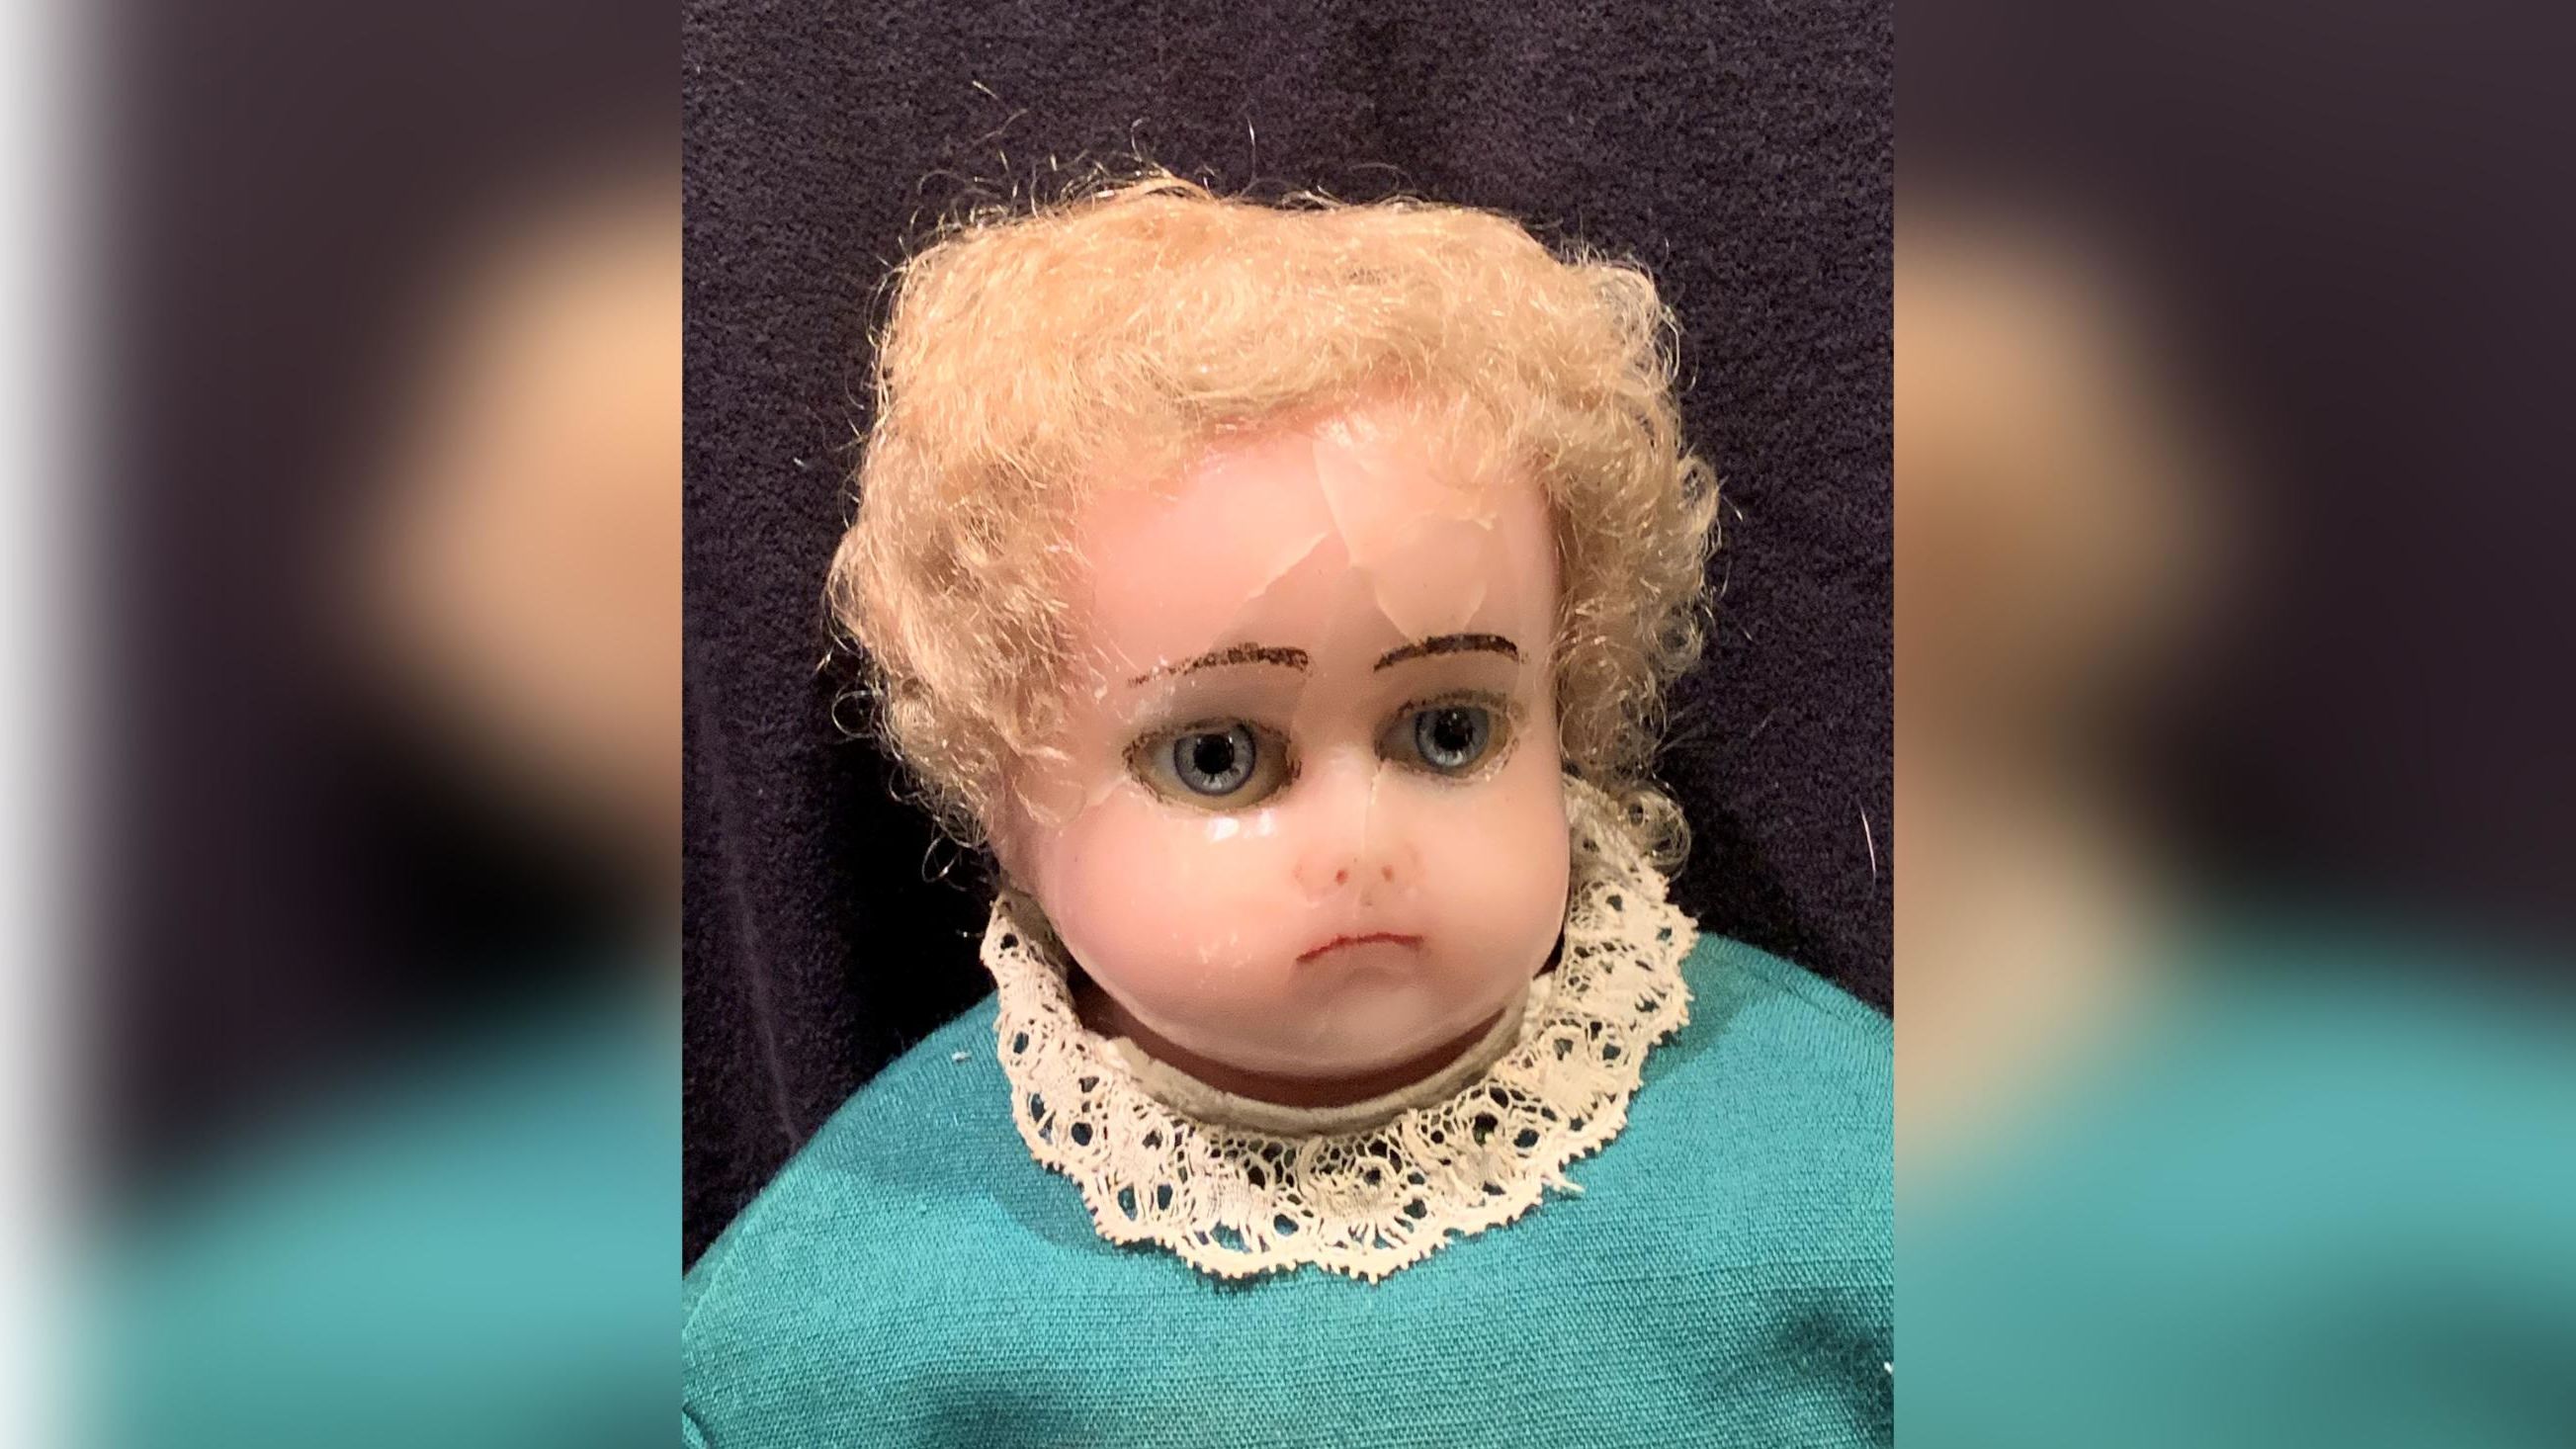 The History Center of Olmsted County is holding a creepy doll competition on Facebook to showcase parts of its collection that don't normally get attention.